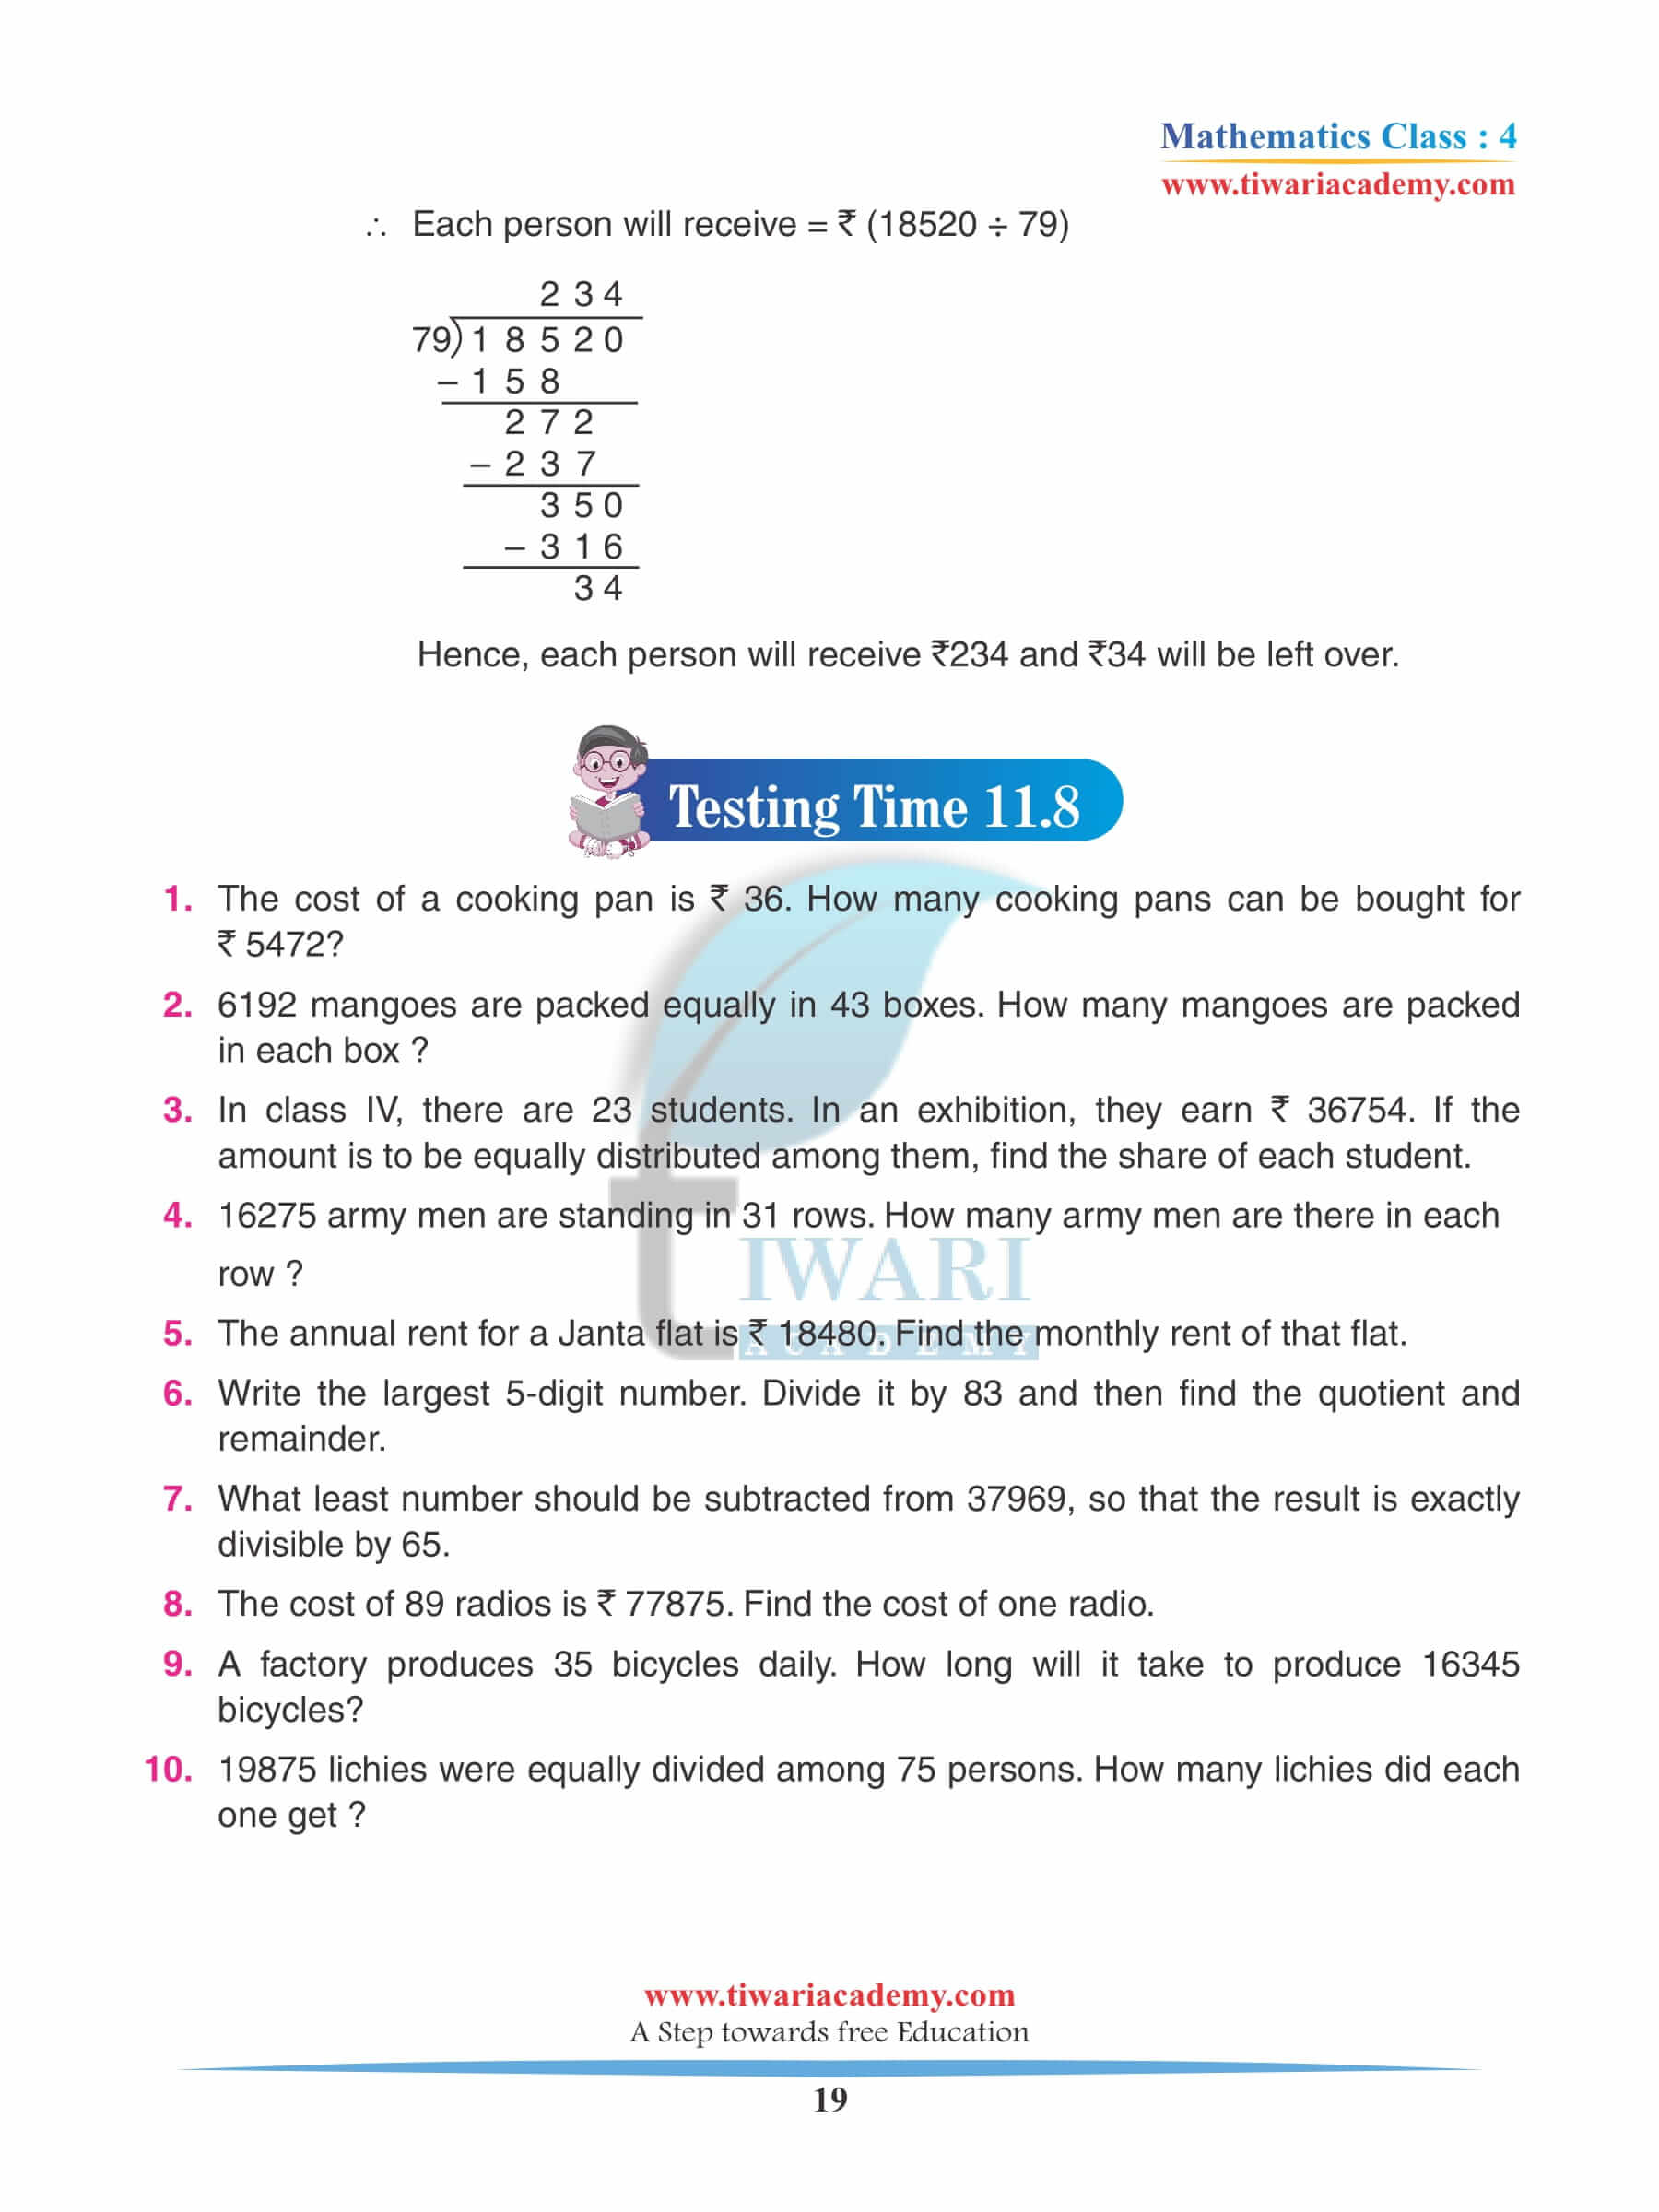 Class 4 Maths Chapter 11 Extra exercises